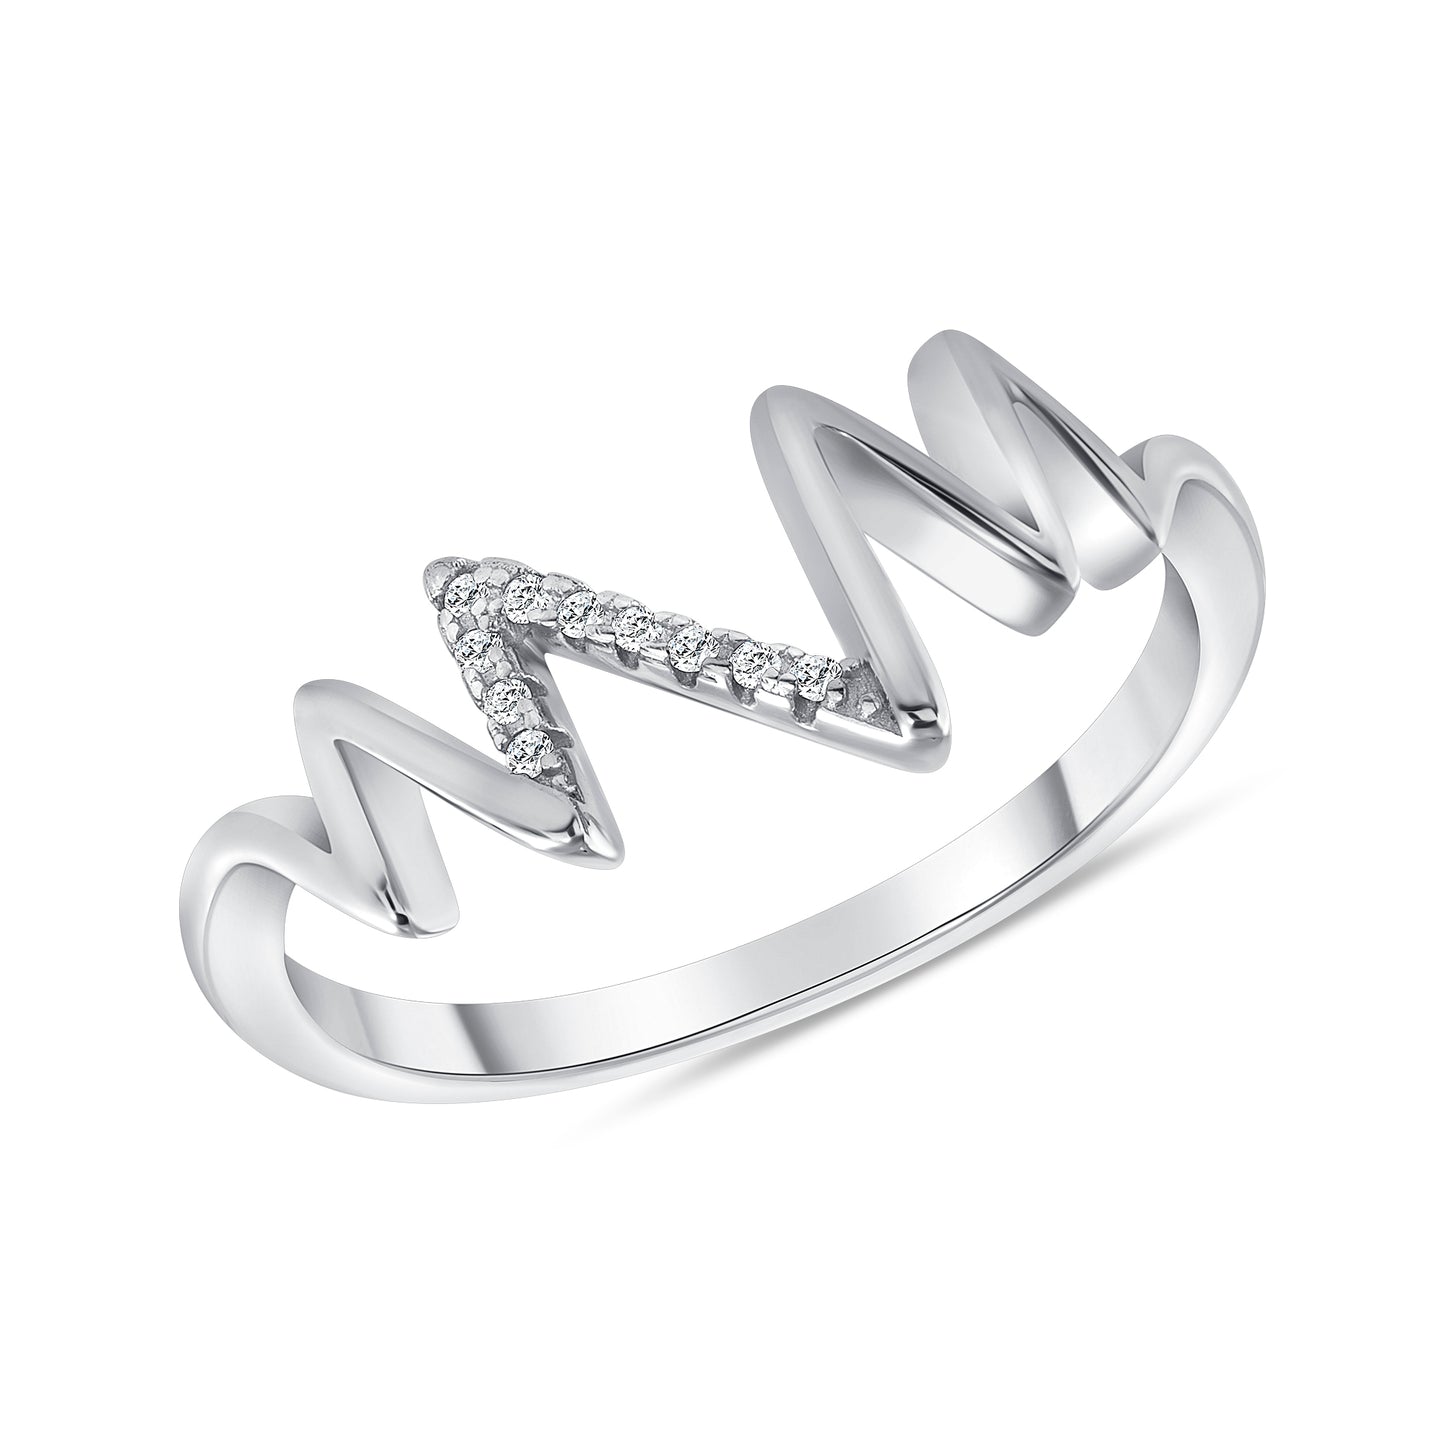 CR00485. Silver 925 Rhodium Plated Heartbeat Cubic Zirconia Ring